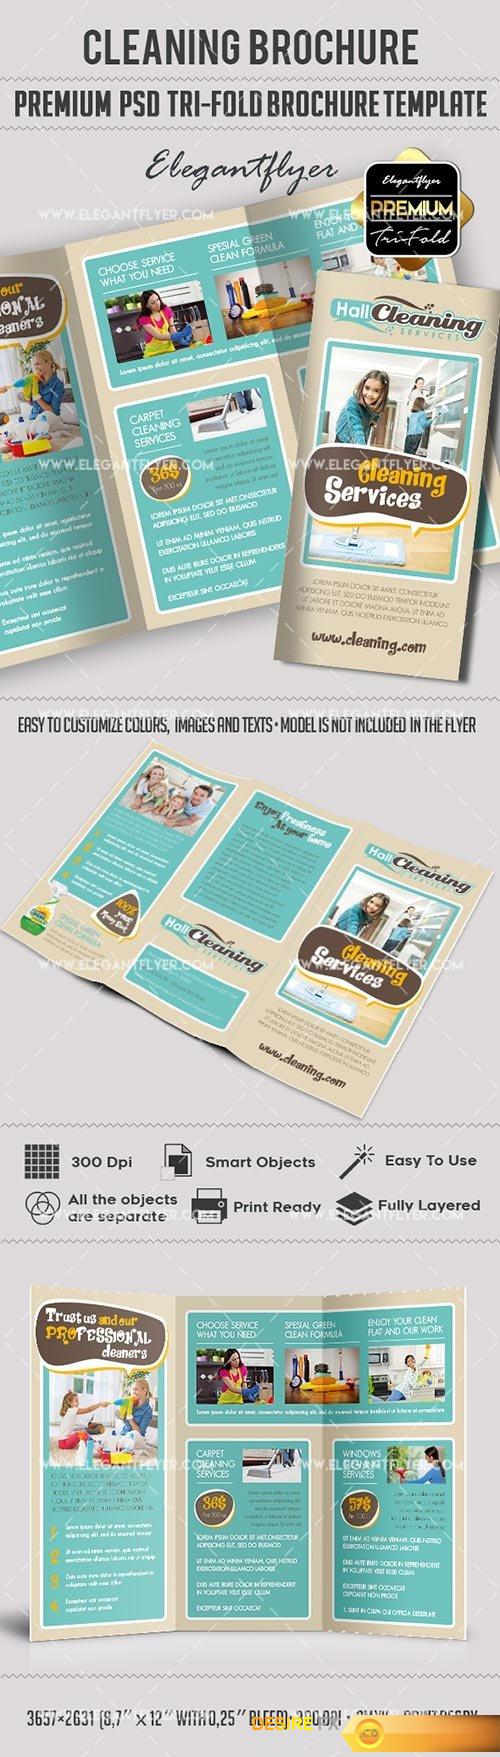 Cleaning Services – Premium Tri-Fold PSD Brochure Template